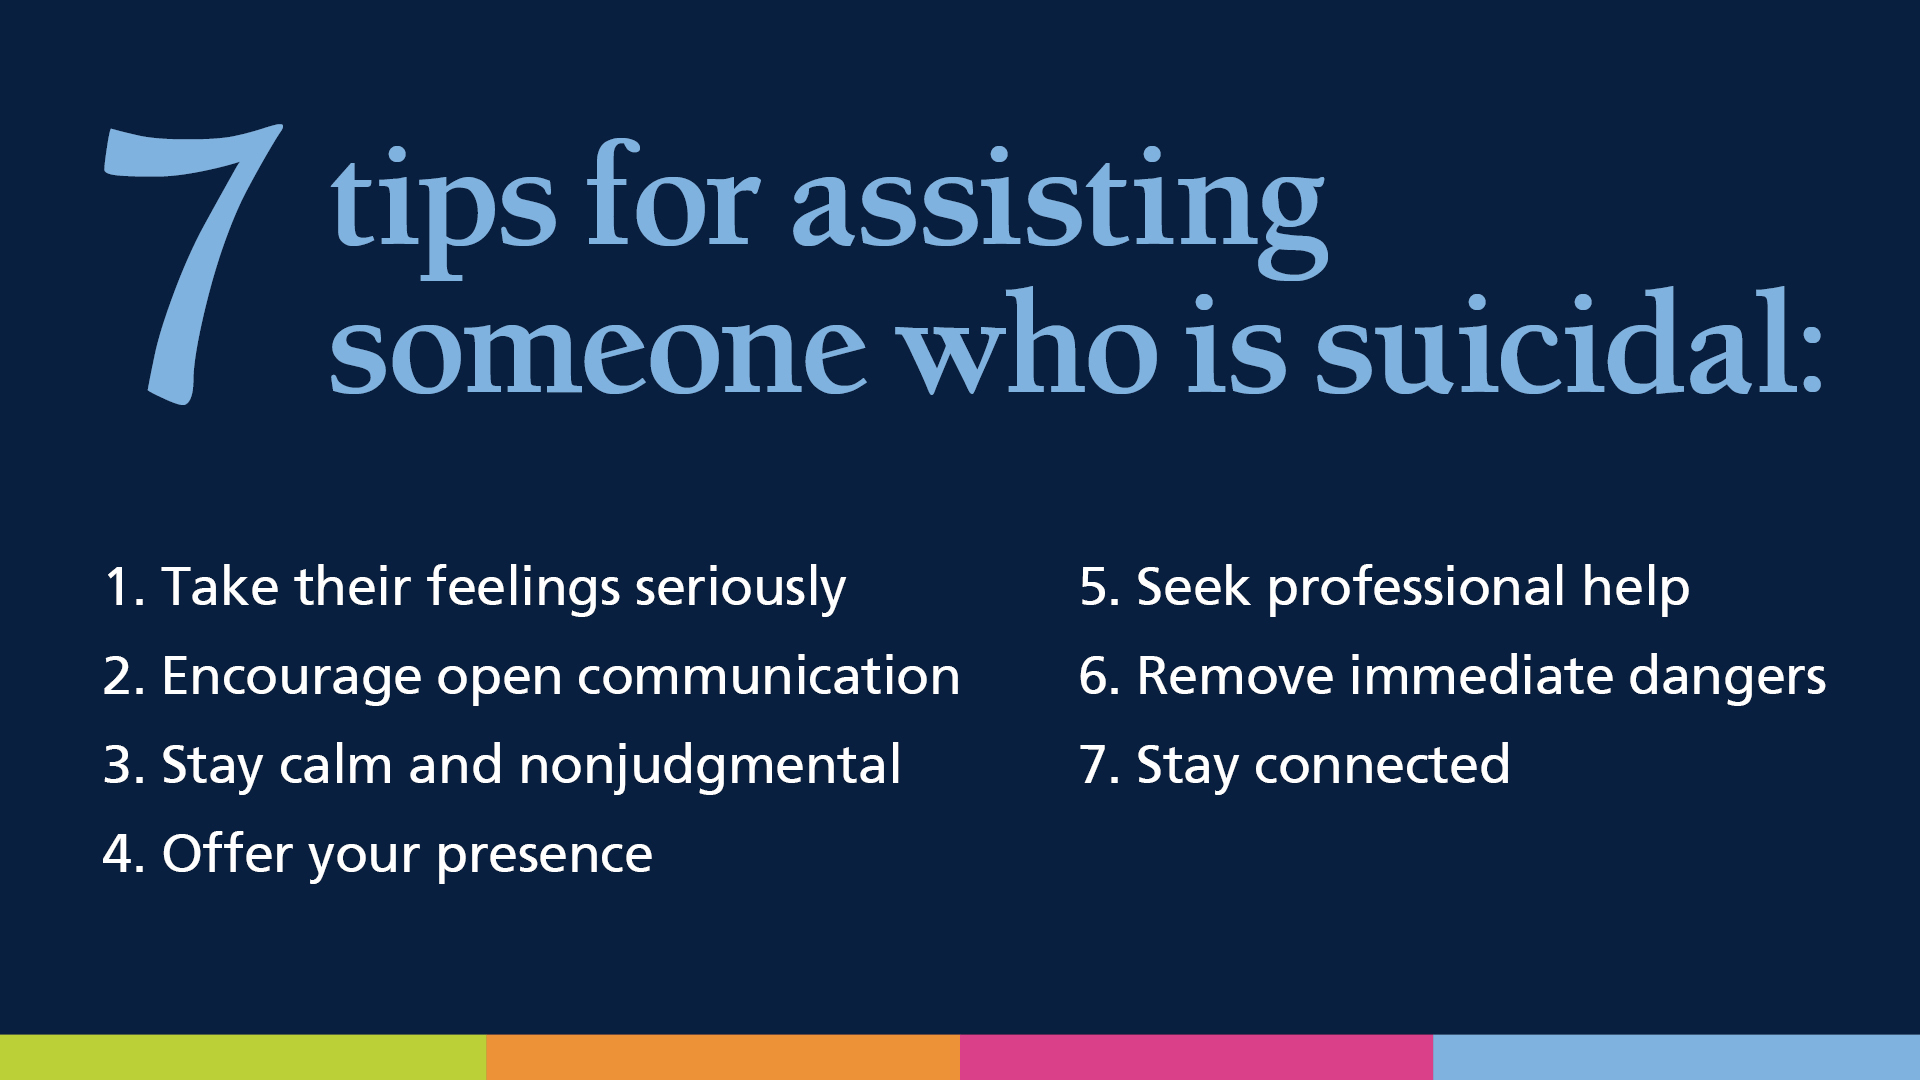 7 tips for assisting someone who is suicidal:
1. Take their feelings seriously
2. Encourage open communication
3. Stay calm and nonjudgmental
4. Offer your presence
5. Seek professional help
6. Remove immediate dangers
7. Stay connected